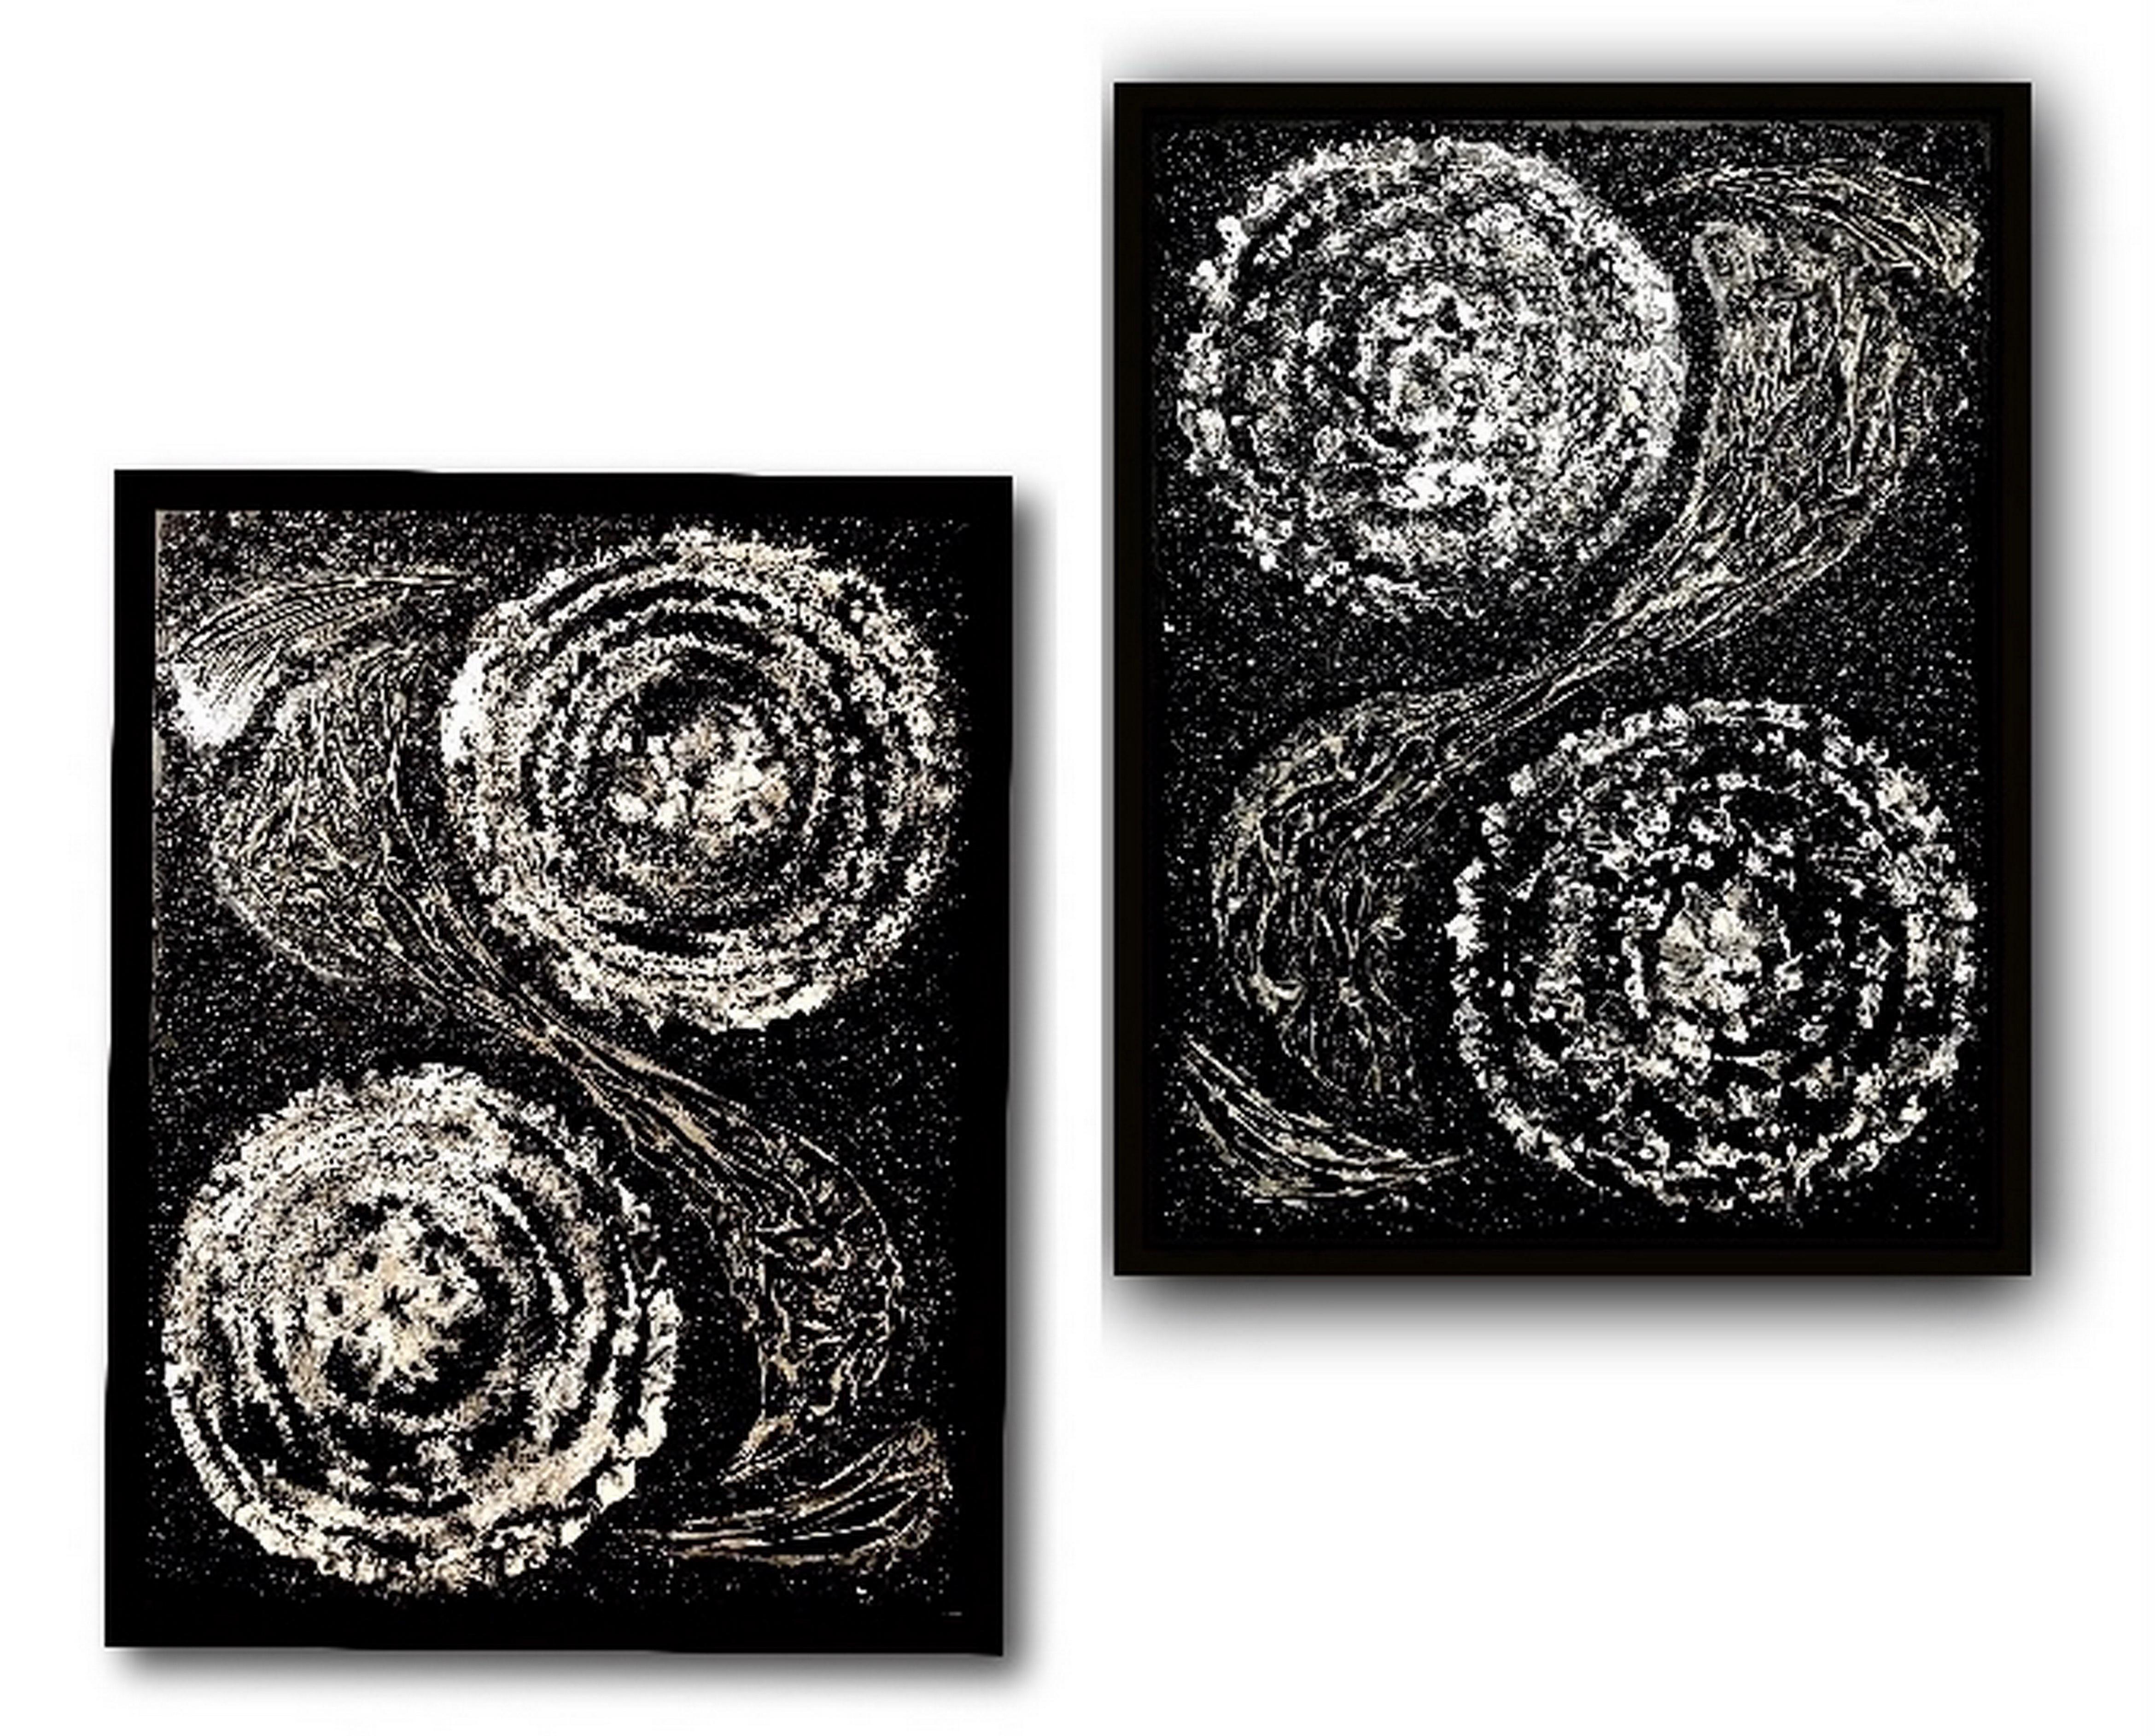  Diptych. Wall sculpture. Collage Mixed Media on canvas, Monochrome black/white.